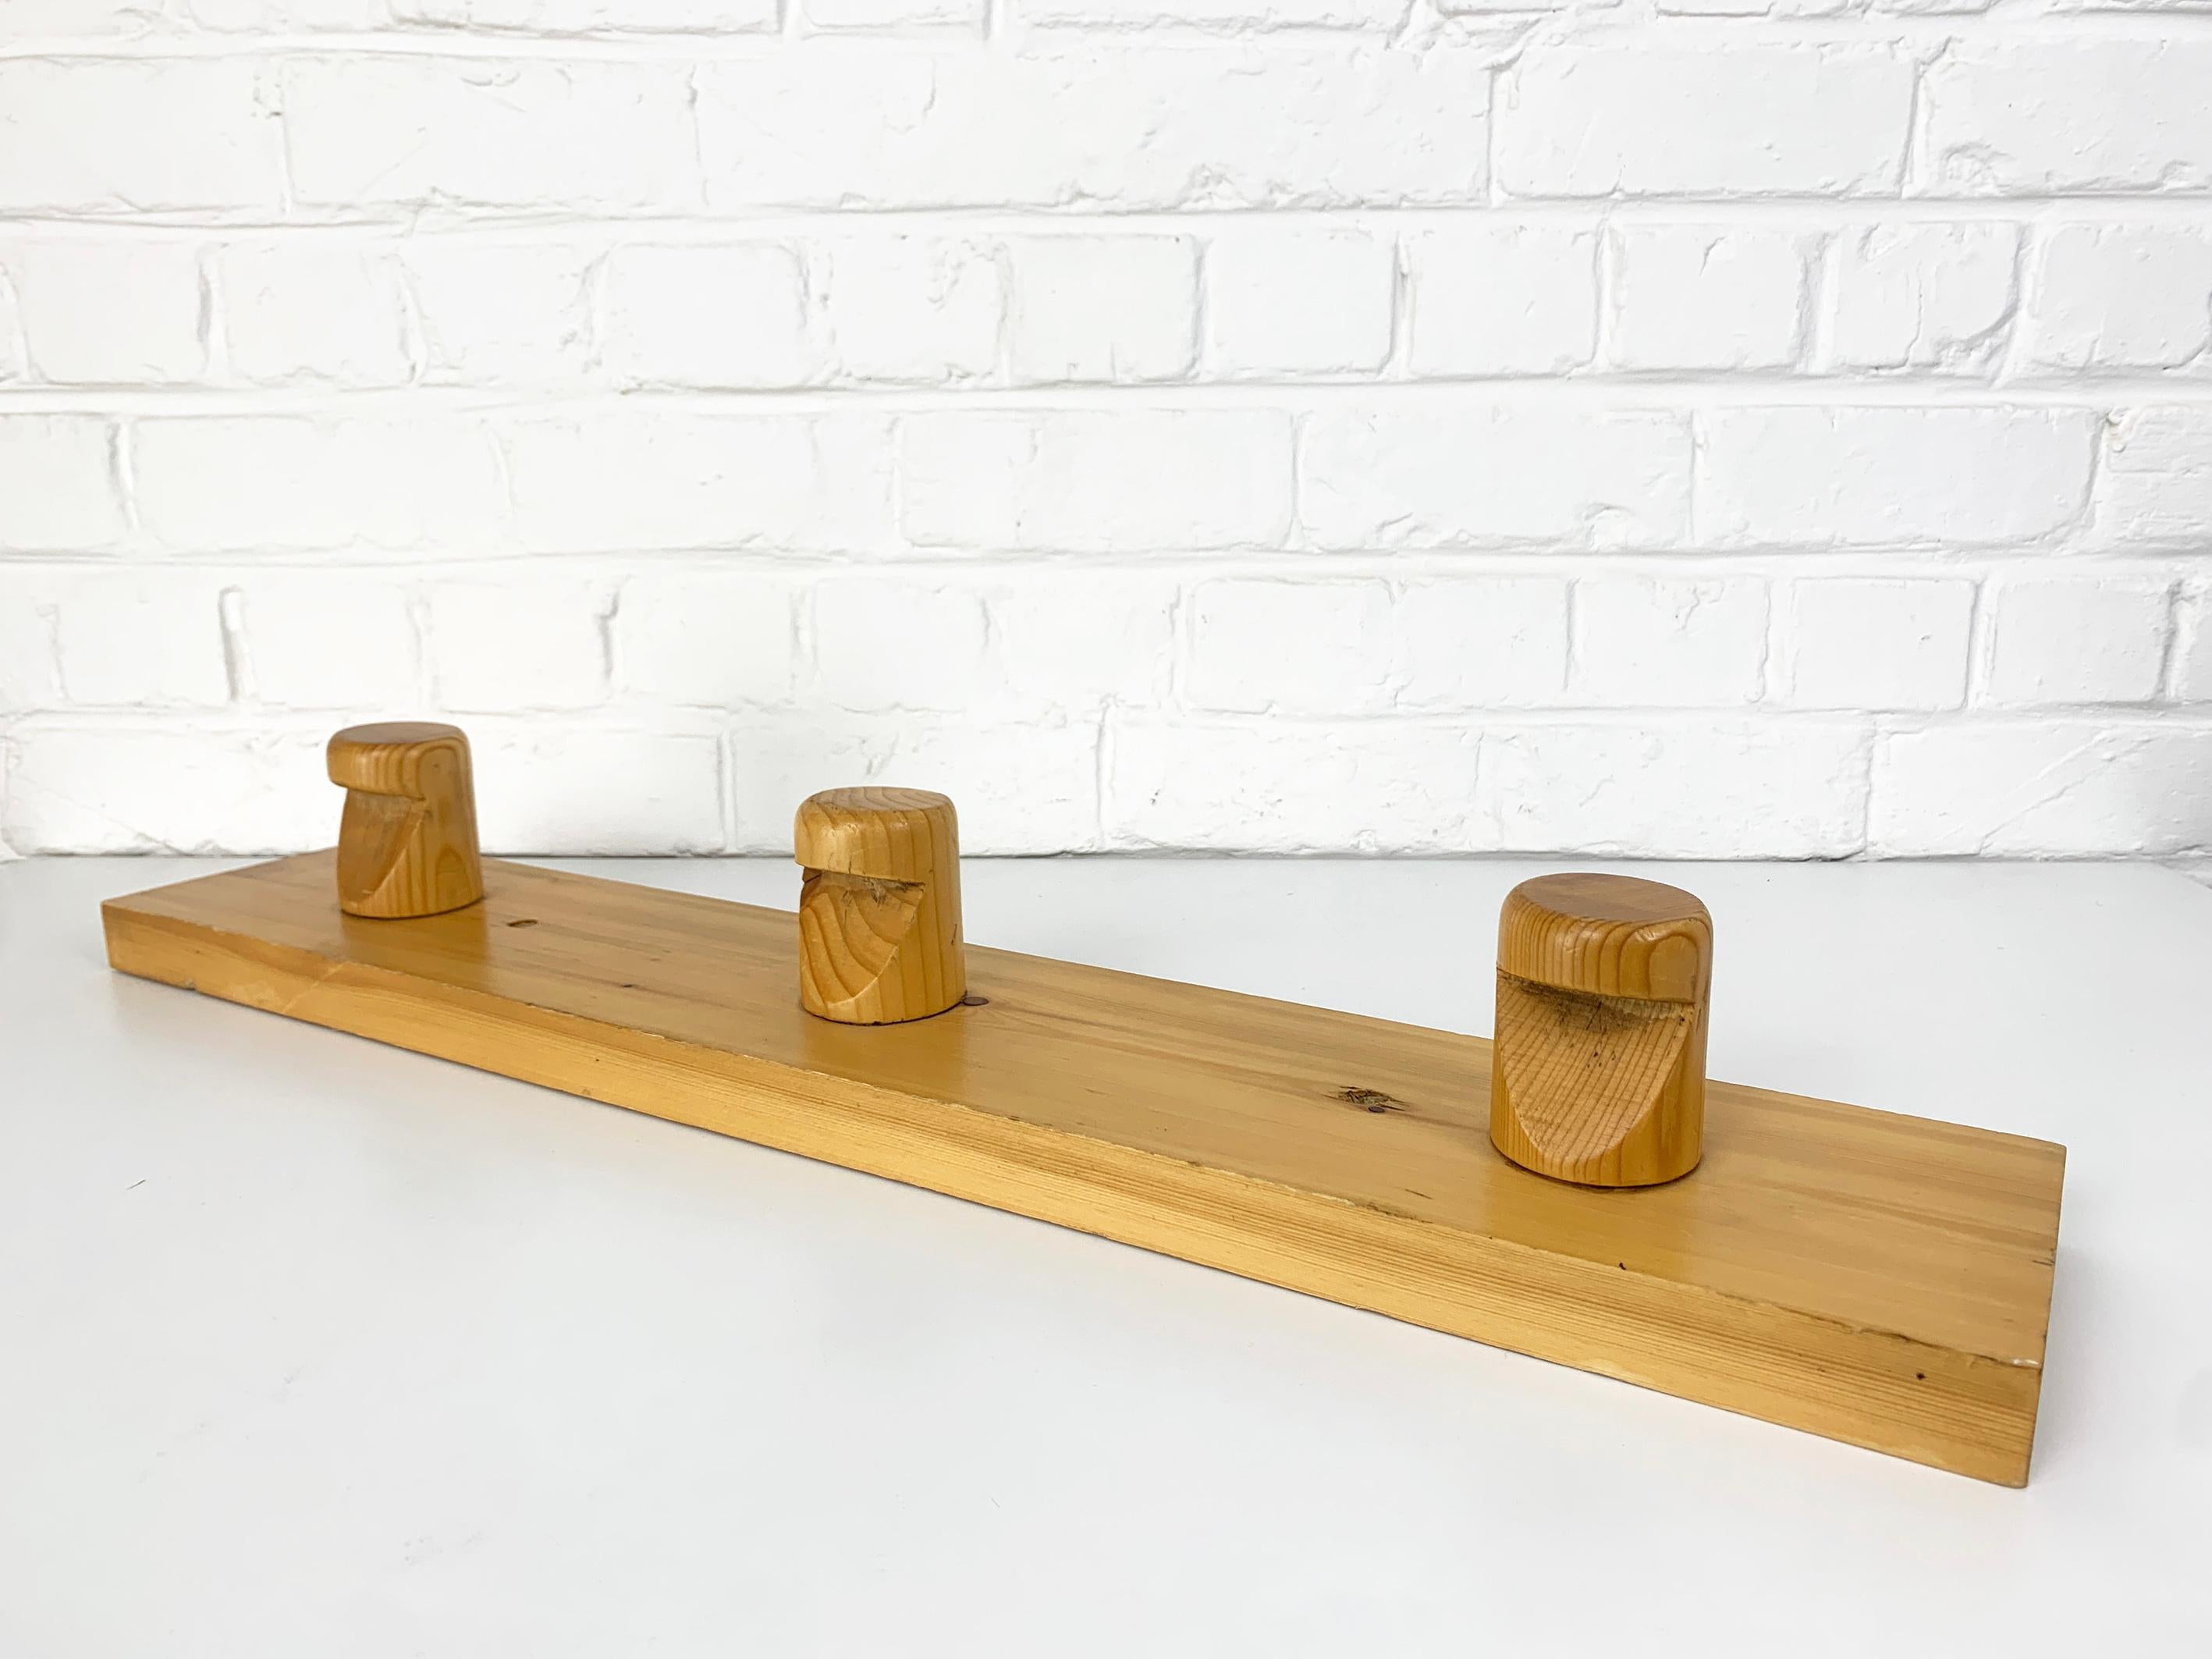 French Coat Rack by Charlotte Perriand for Les Arcs, Pinewood, 1960s - 3 avail. In Fair Condition For Sale In Vorst, BE